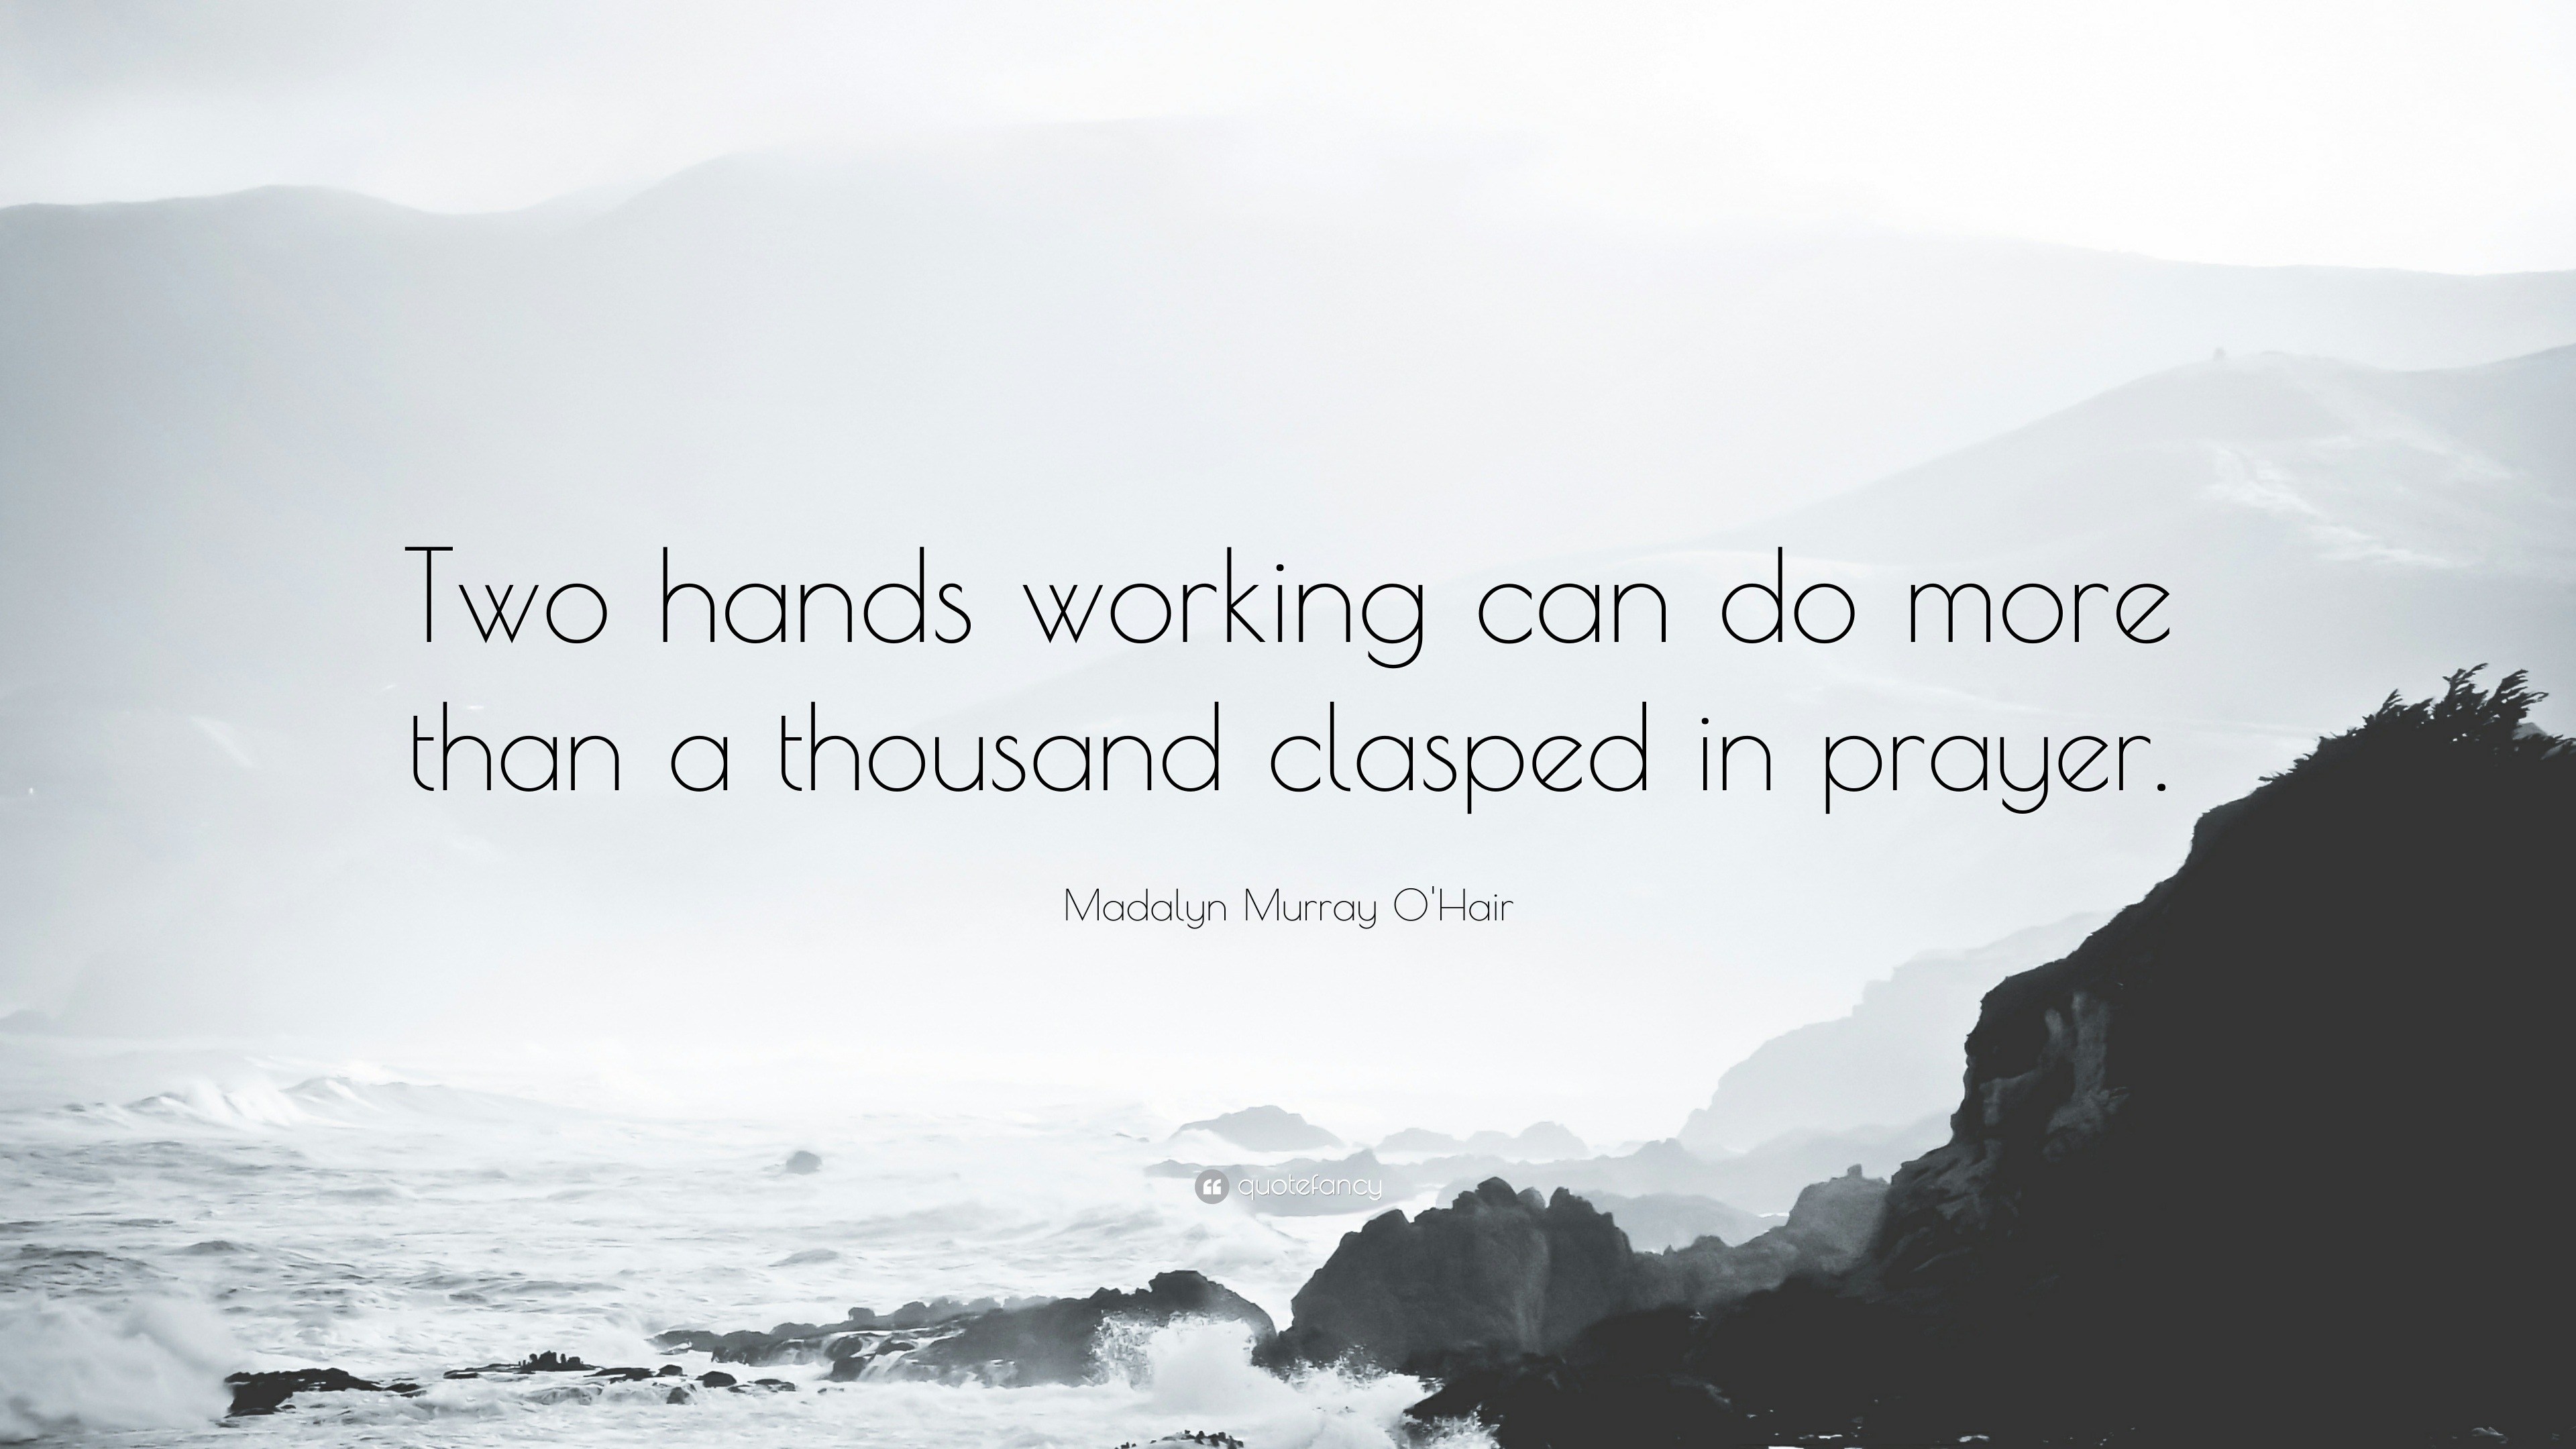 Madalyn Murray OHair Quotes 33 Wallpapers Quotefancy